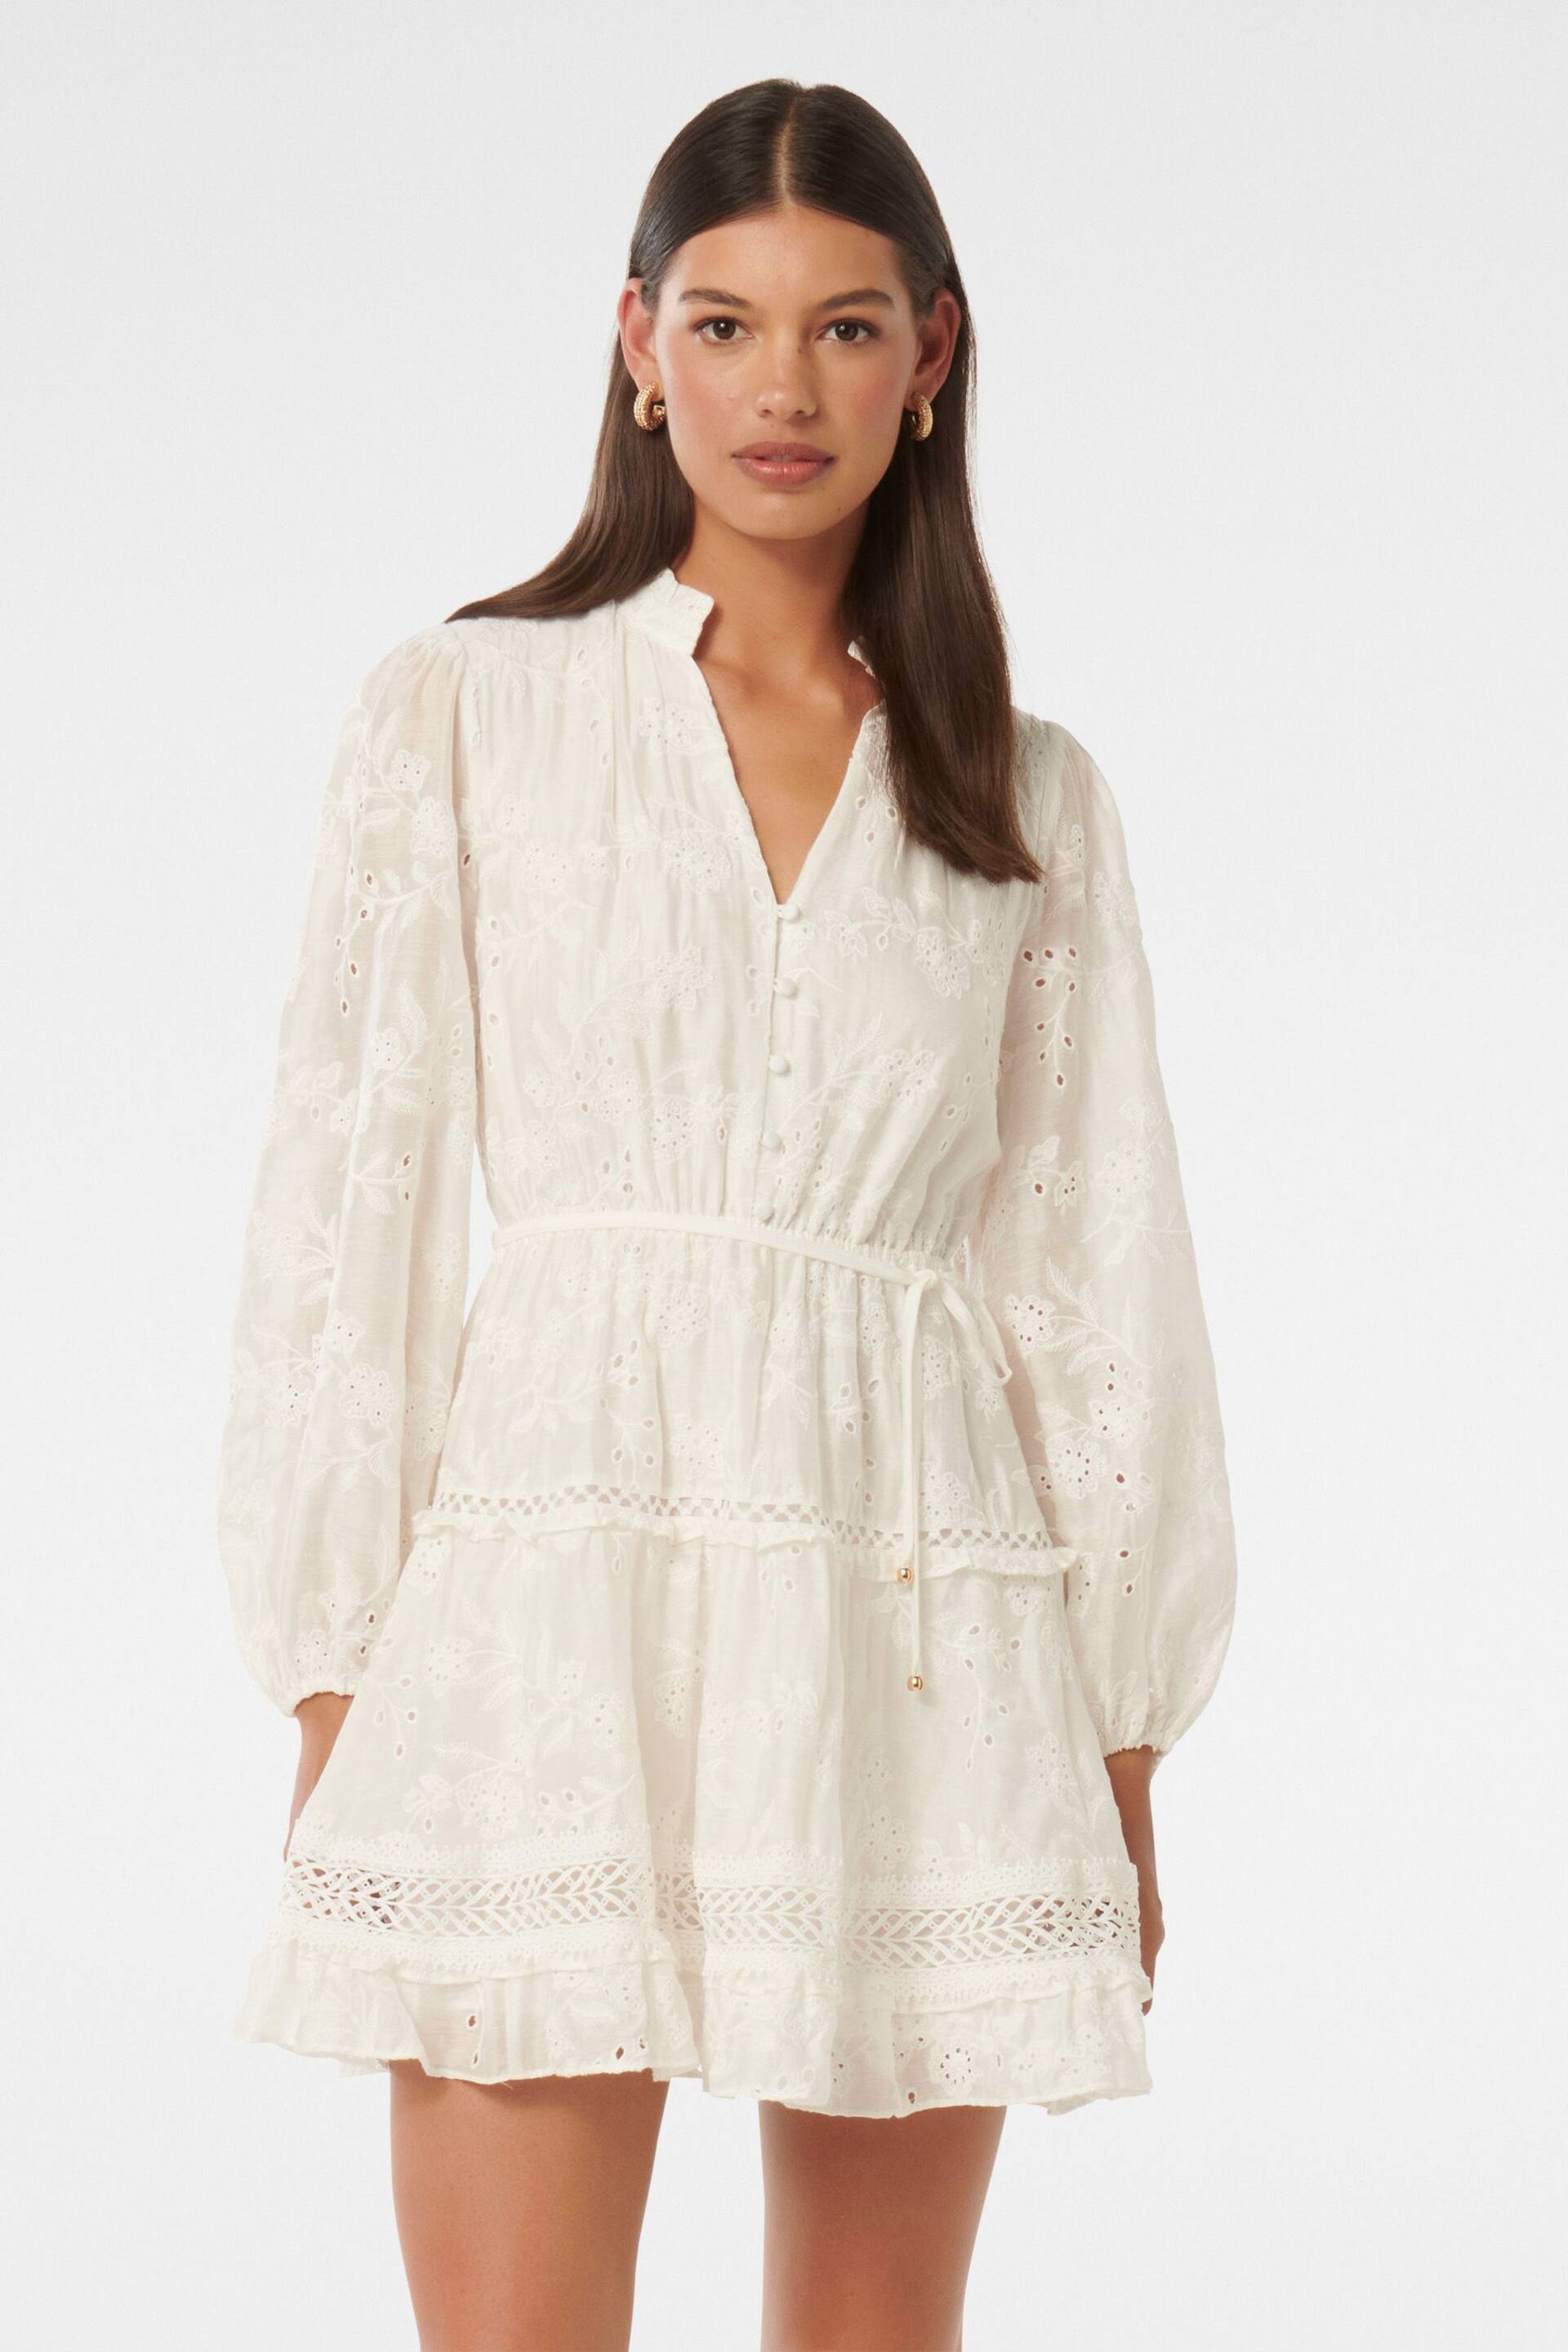 Forever New White Ivana Trim Detail Mini Dress With A Touch of Linen - Image 1 of 5